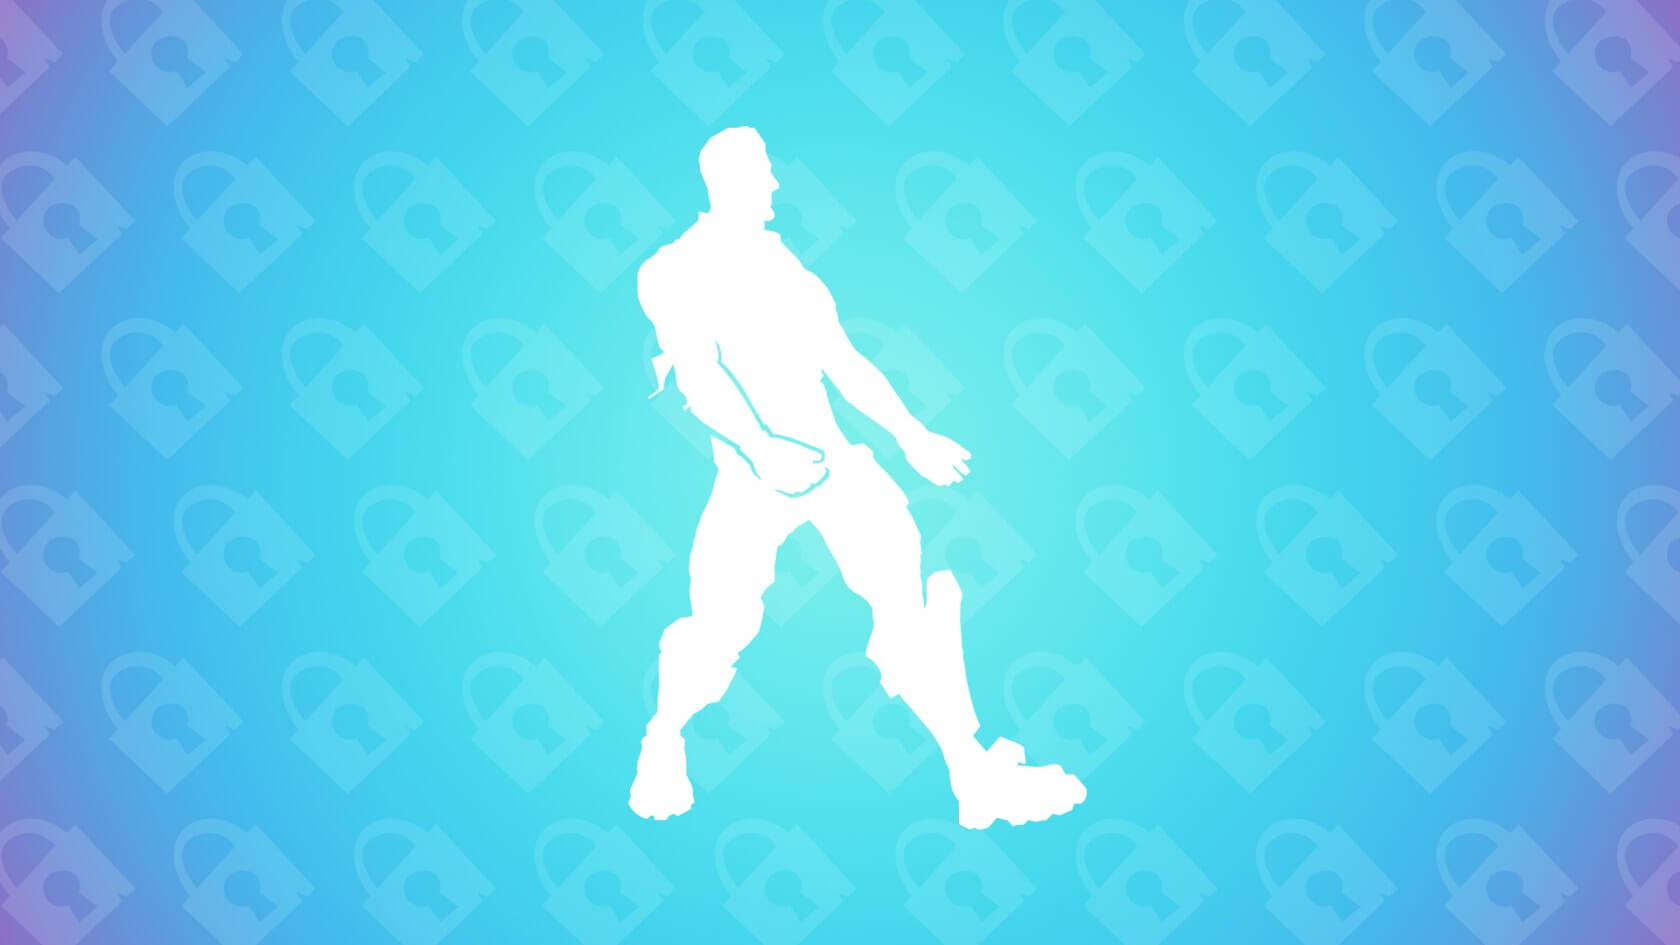 Fortnite is offering an in-game reward if you enable 2FA